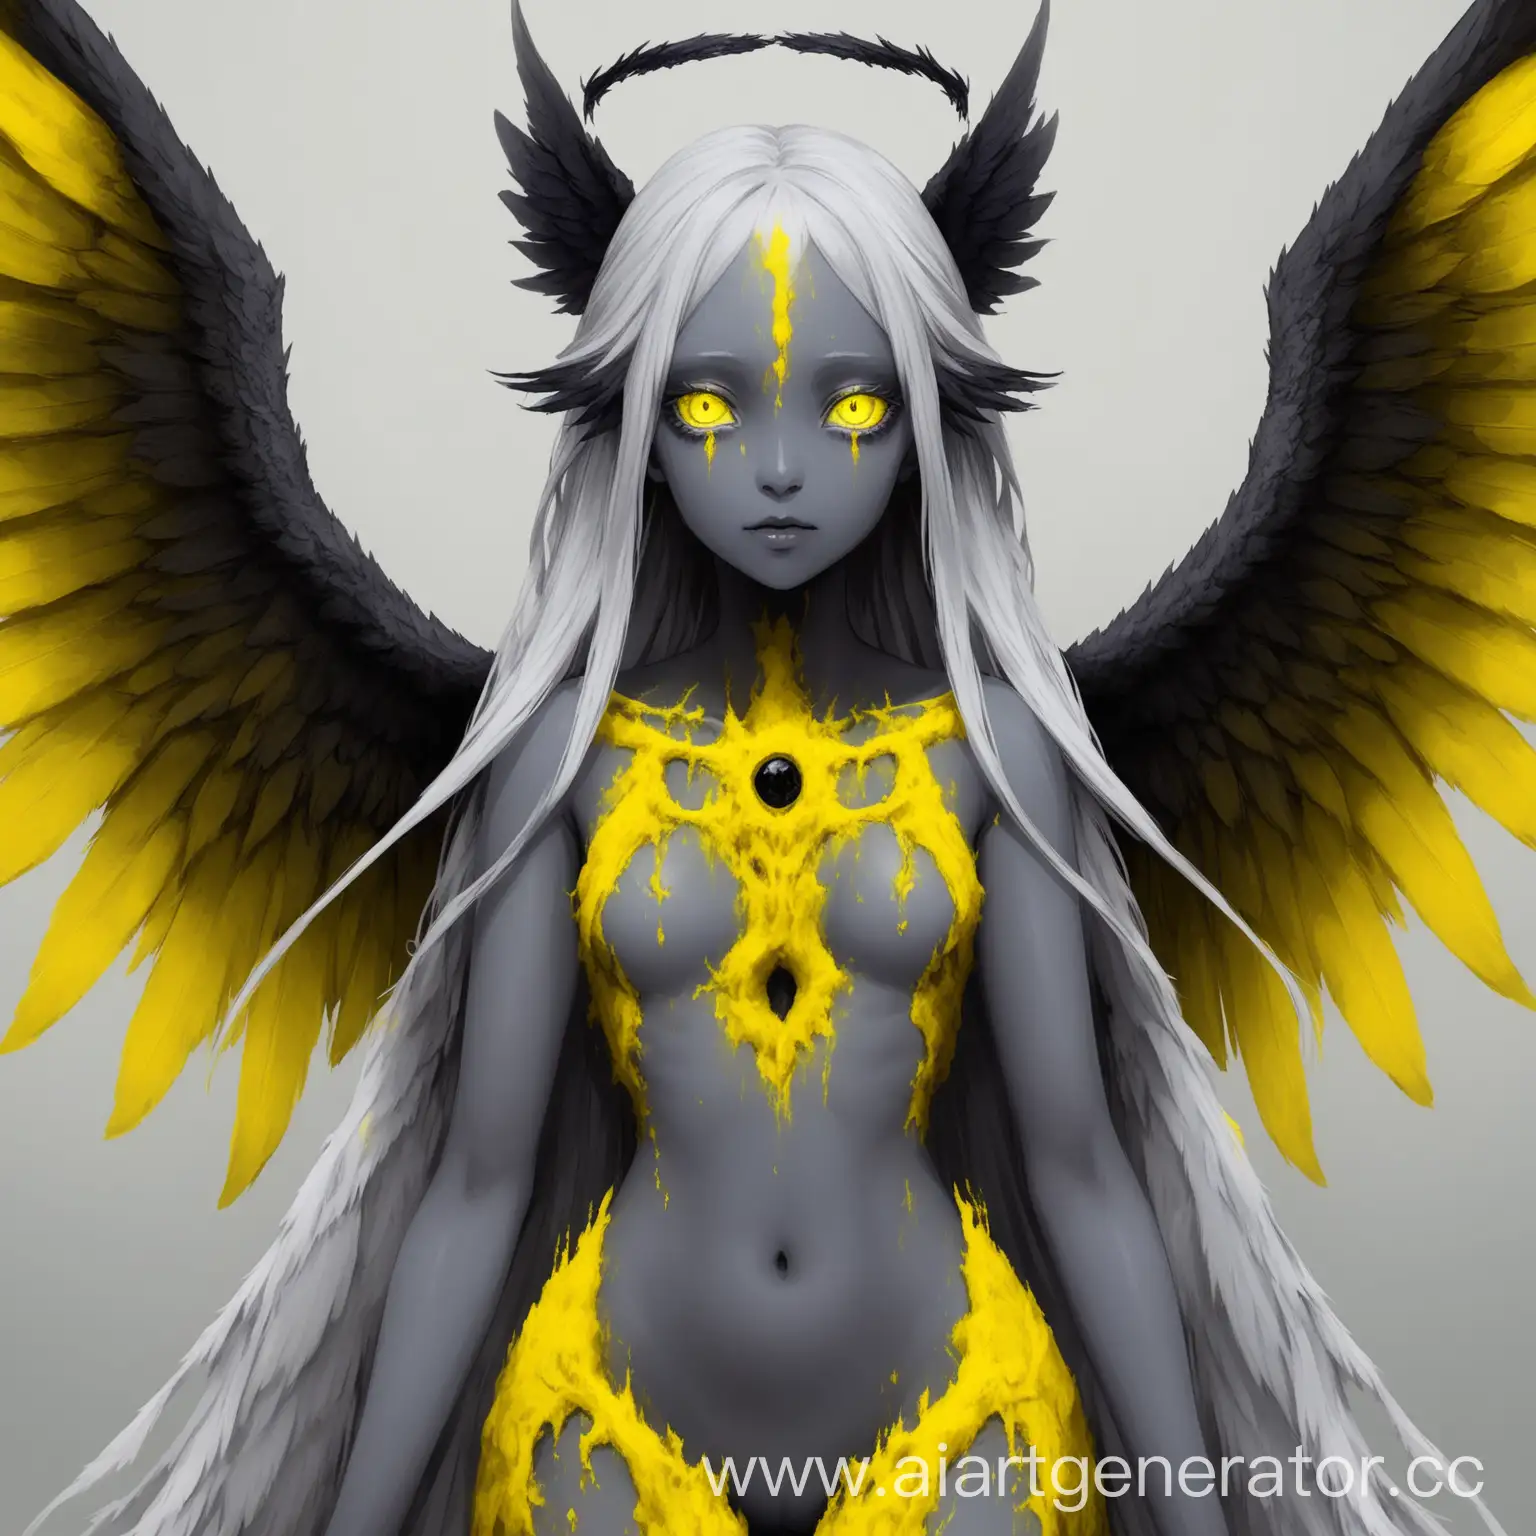 Enigmatic-Creatures-with-Gray-Skin-Sulfur-Eyes-and-Majestic-Wings